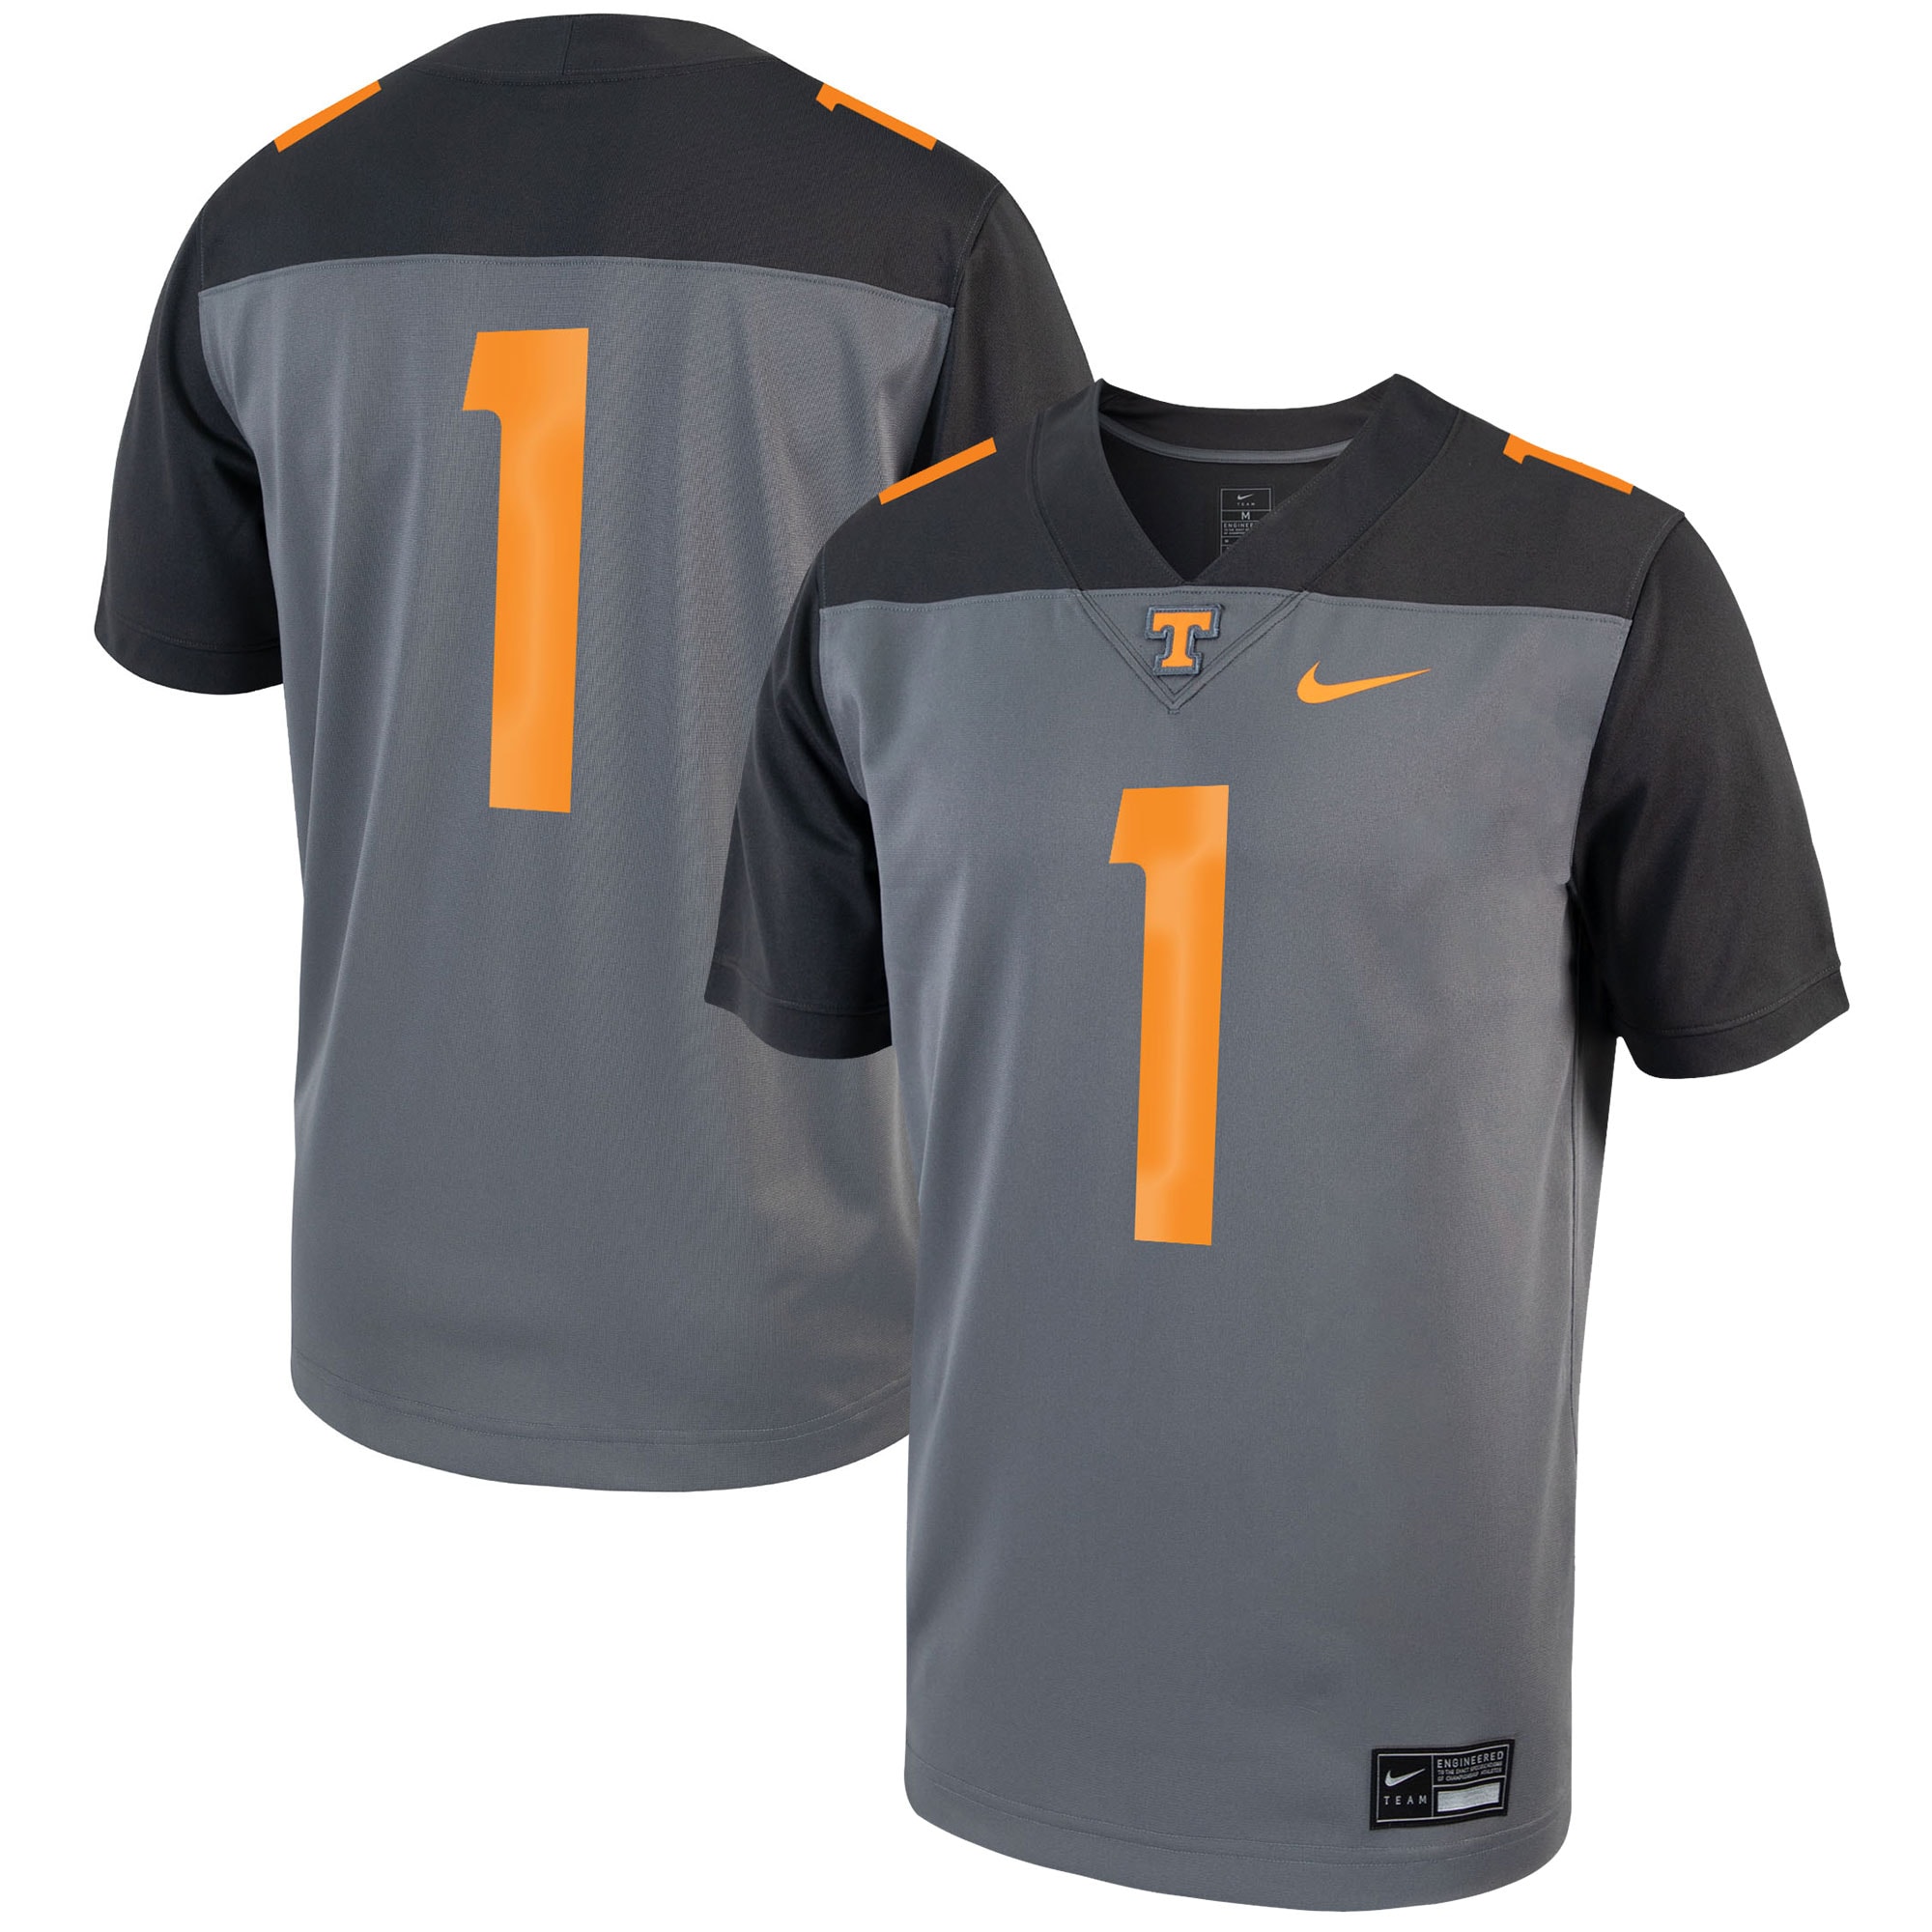 #1 Tennessee Volunteers Alternate Game  Football Shirts Jersey - Gray For Youth Women Men